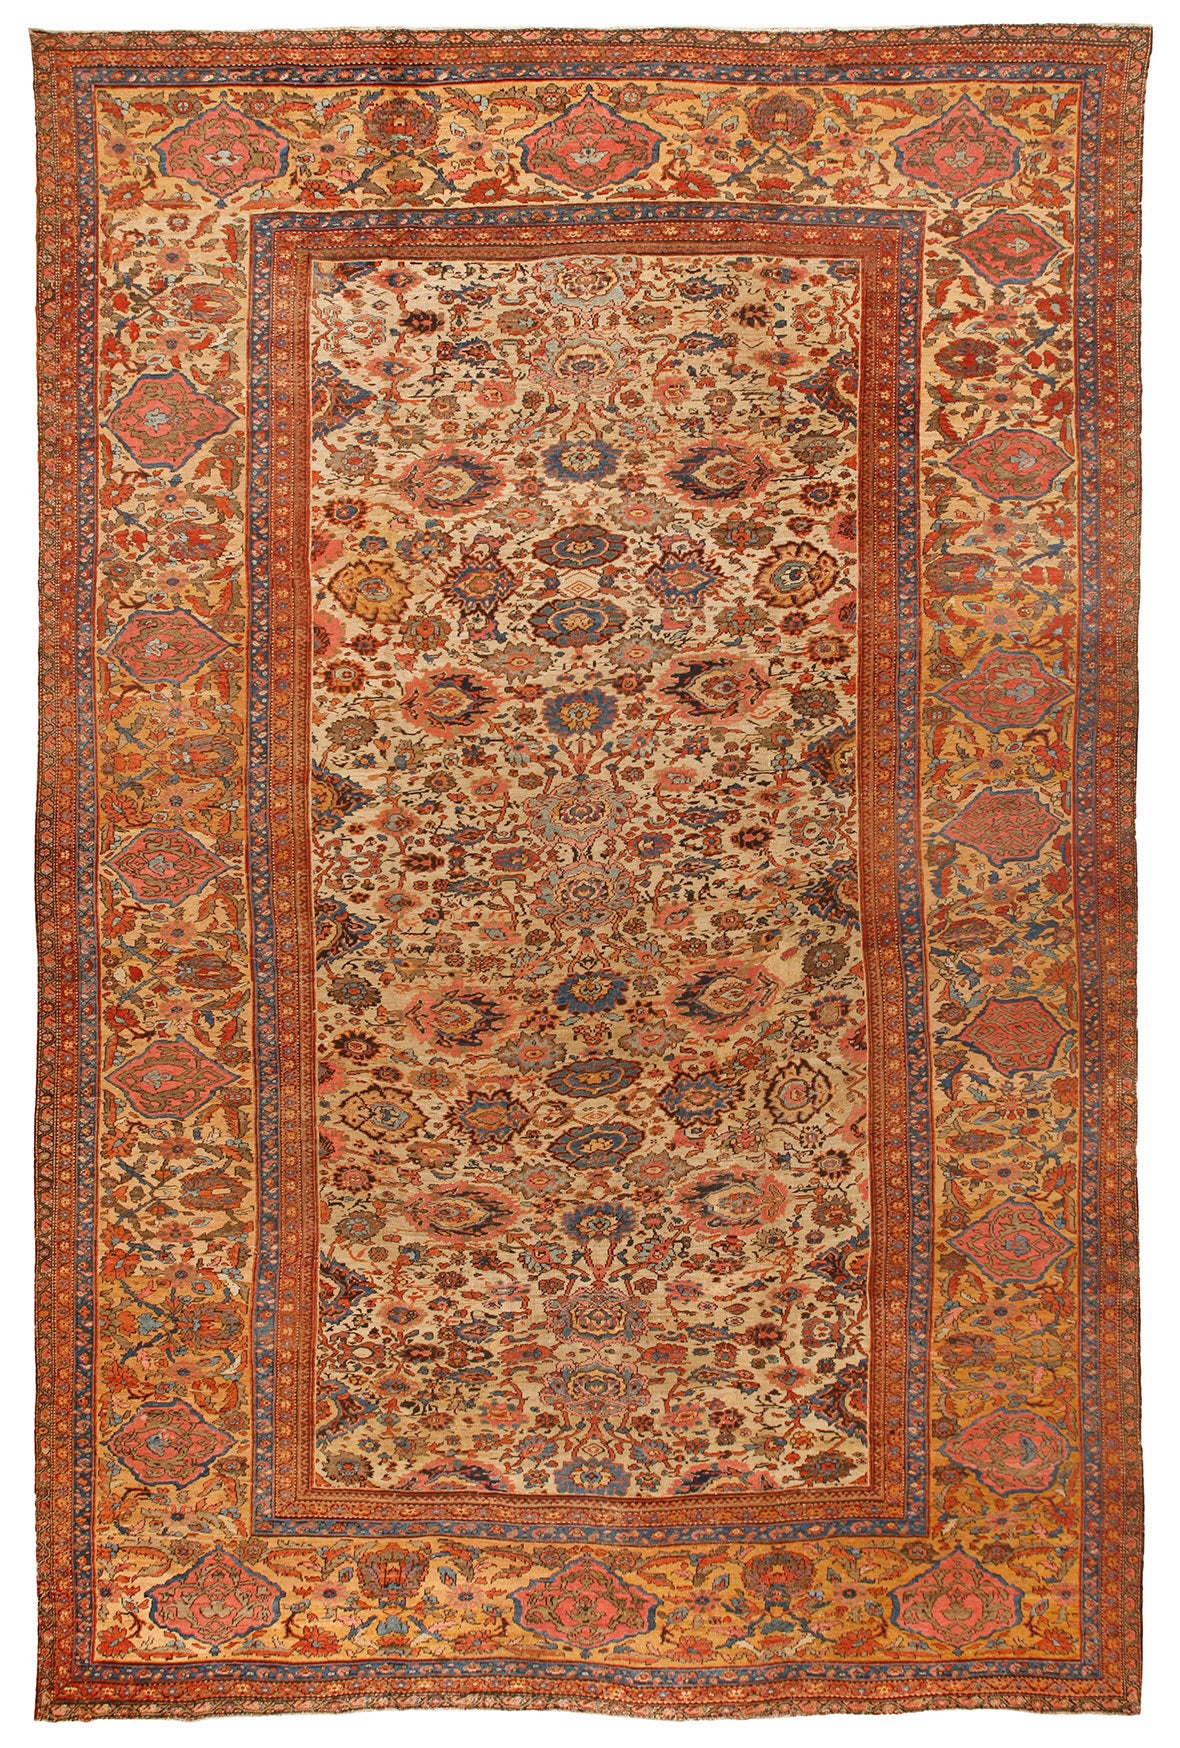 Antique Oversize 19th Century Persian Sultanabad Carpet For Sale